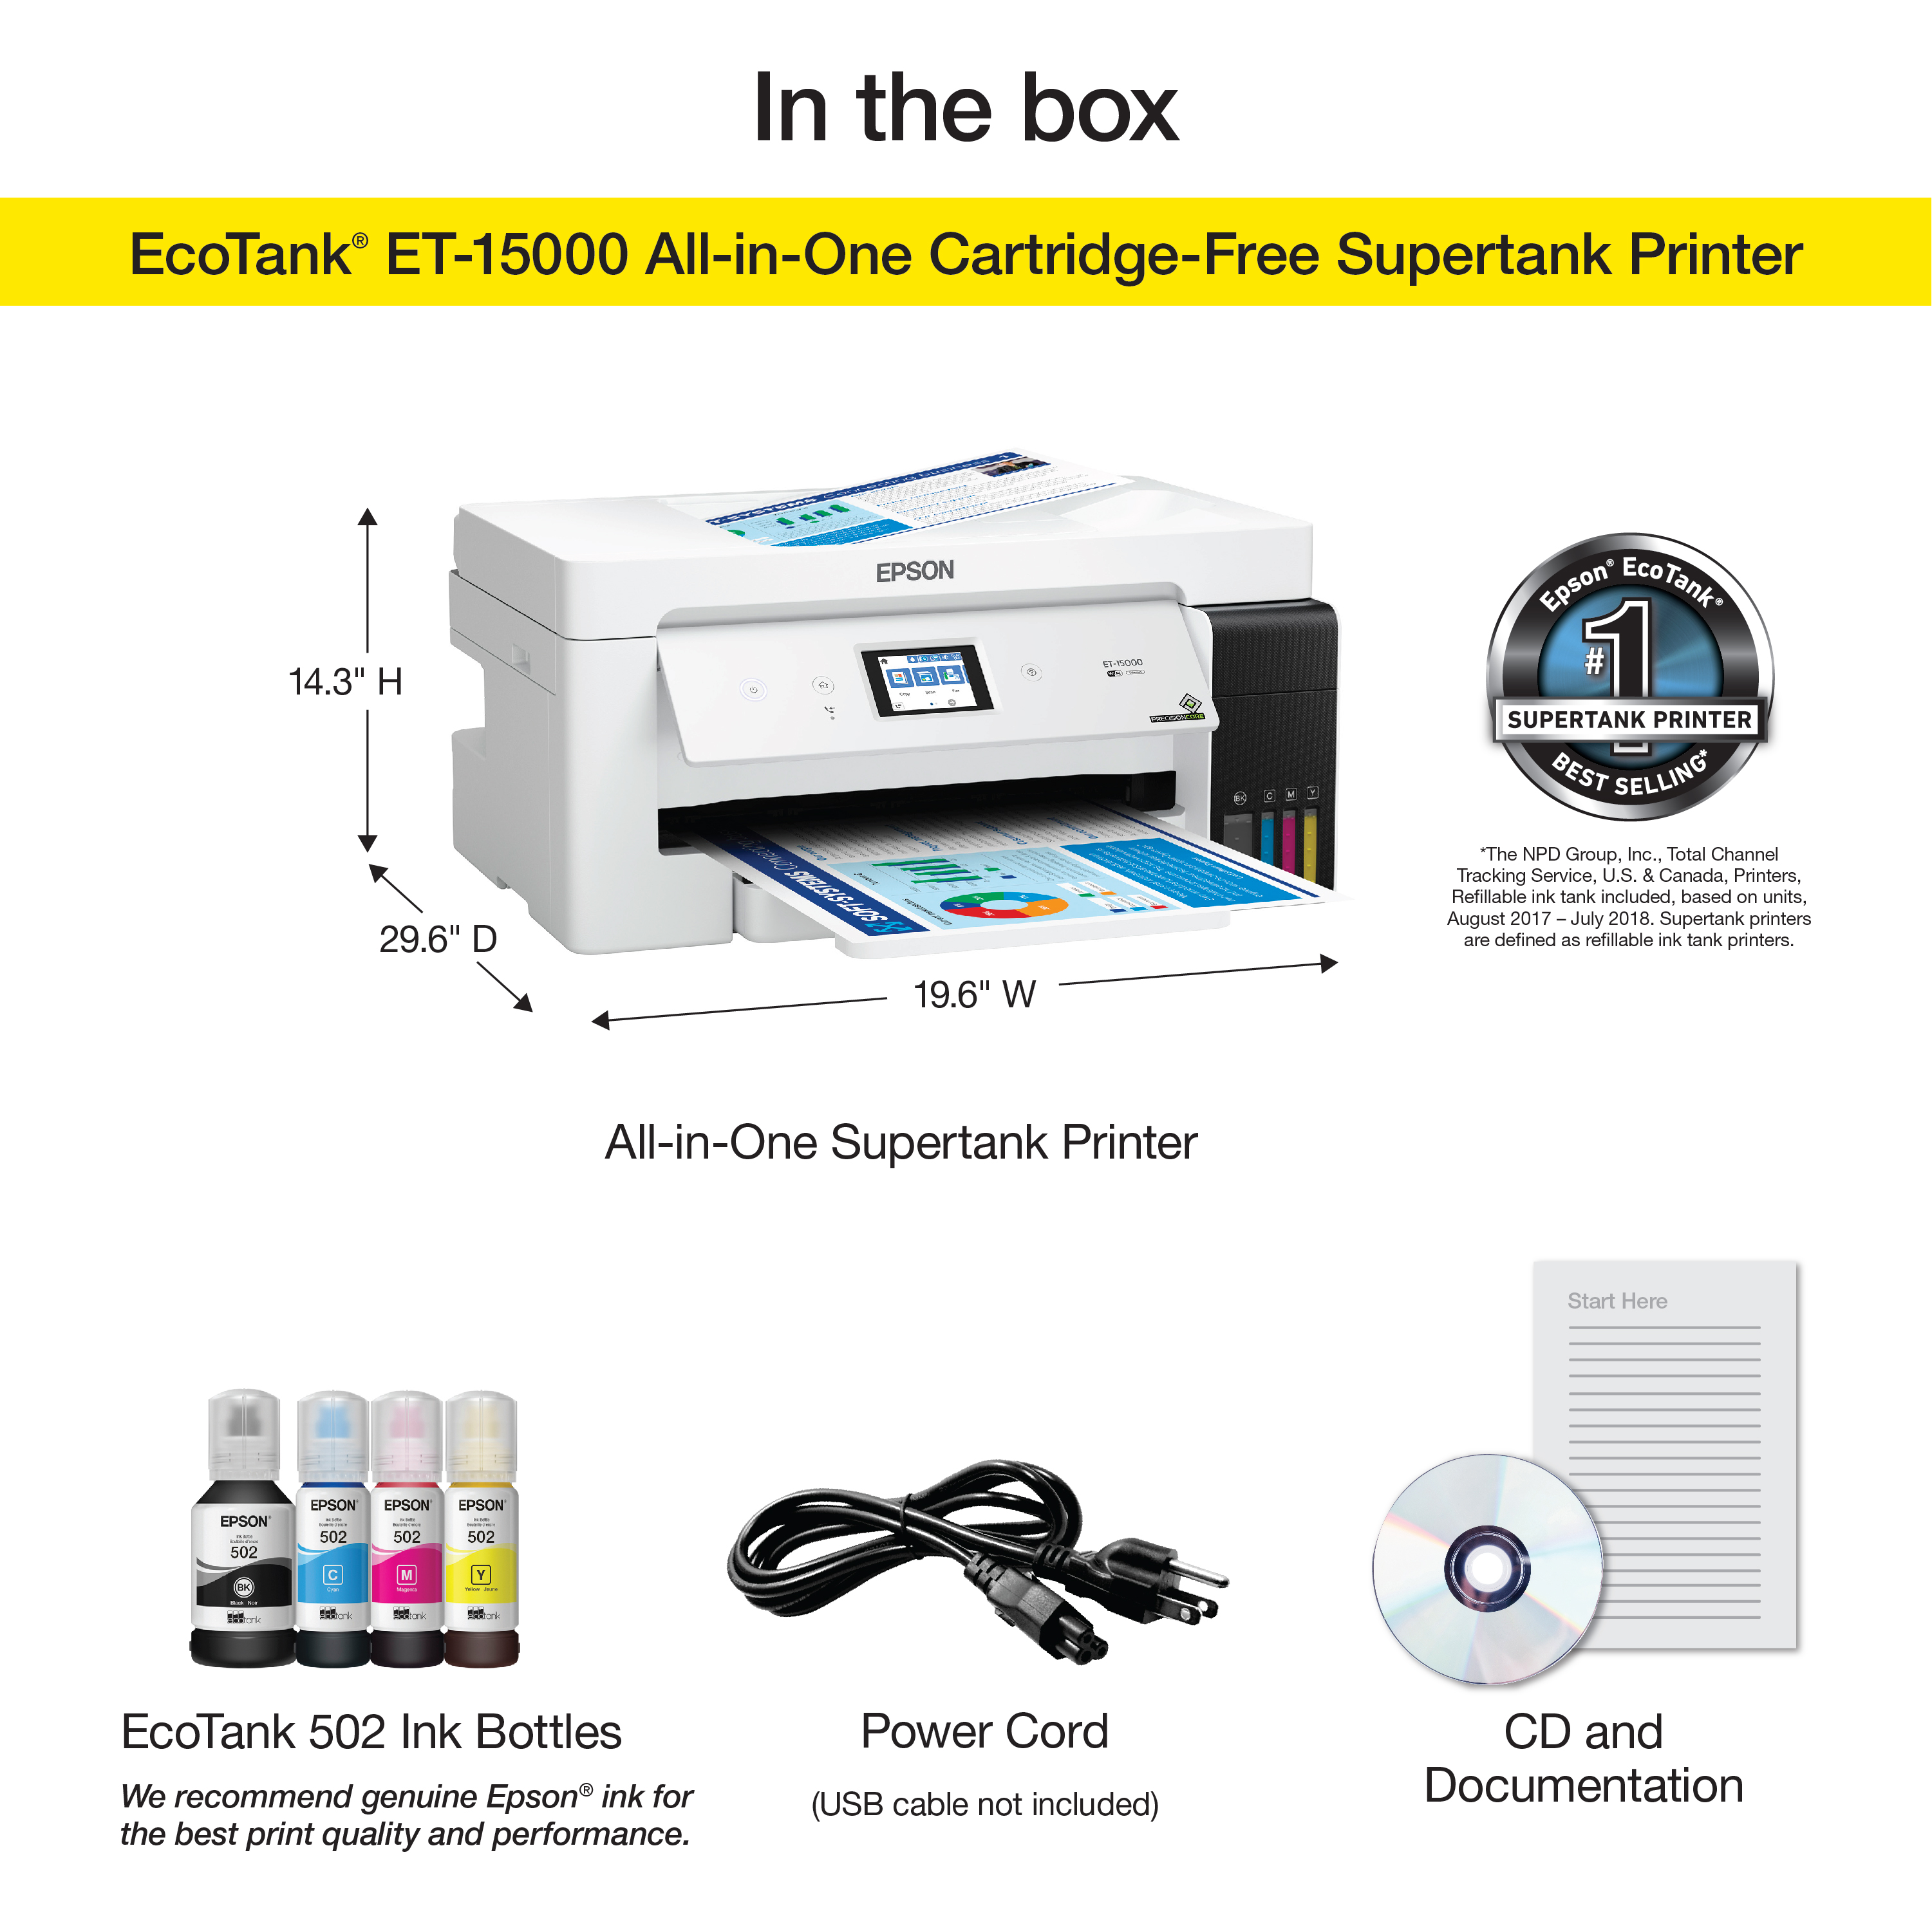 Epson EcoTank ET-15000 Wireless Color All-in-One Supertank Printer with Scanner, Copier, Fax, Ethernet and Printing up to 13 x 19 Inches - image 5 of 6